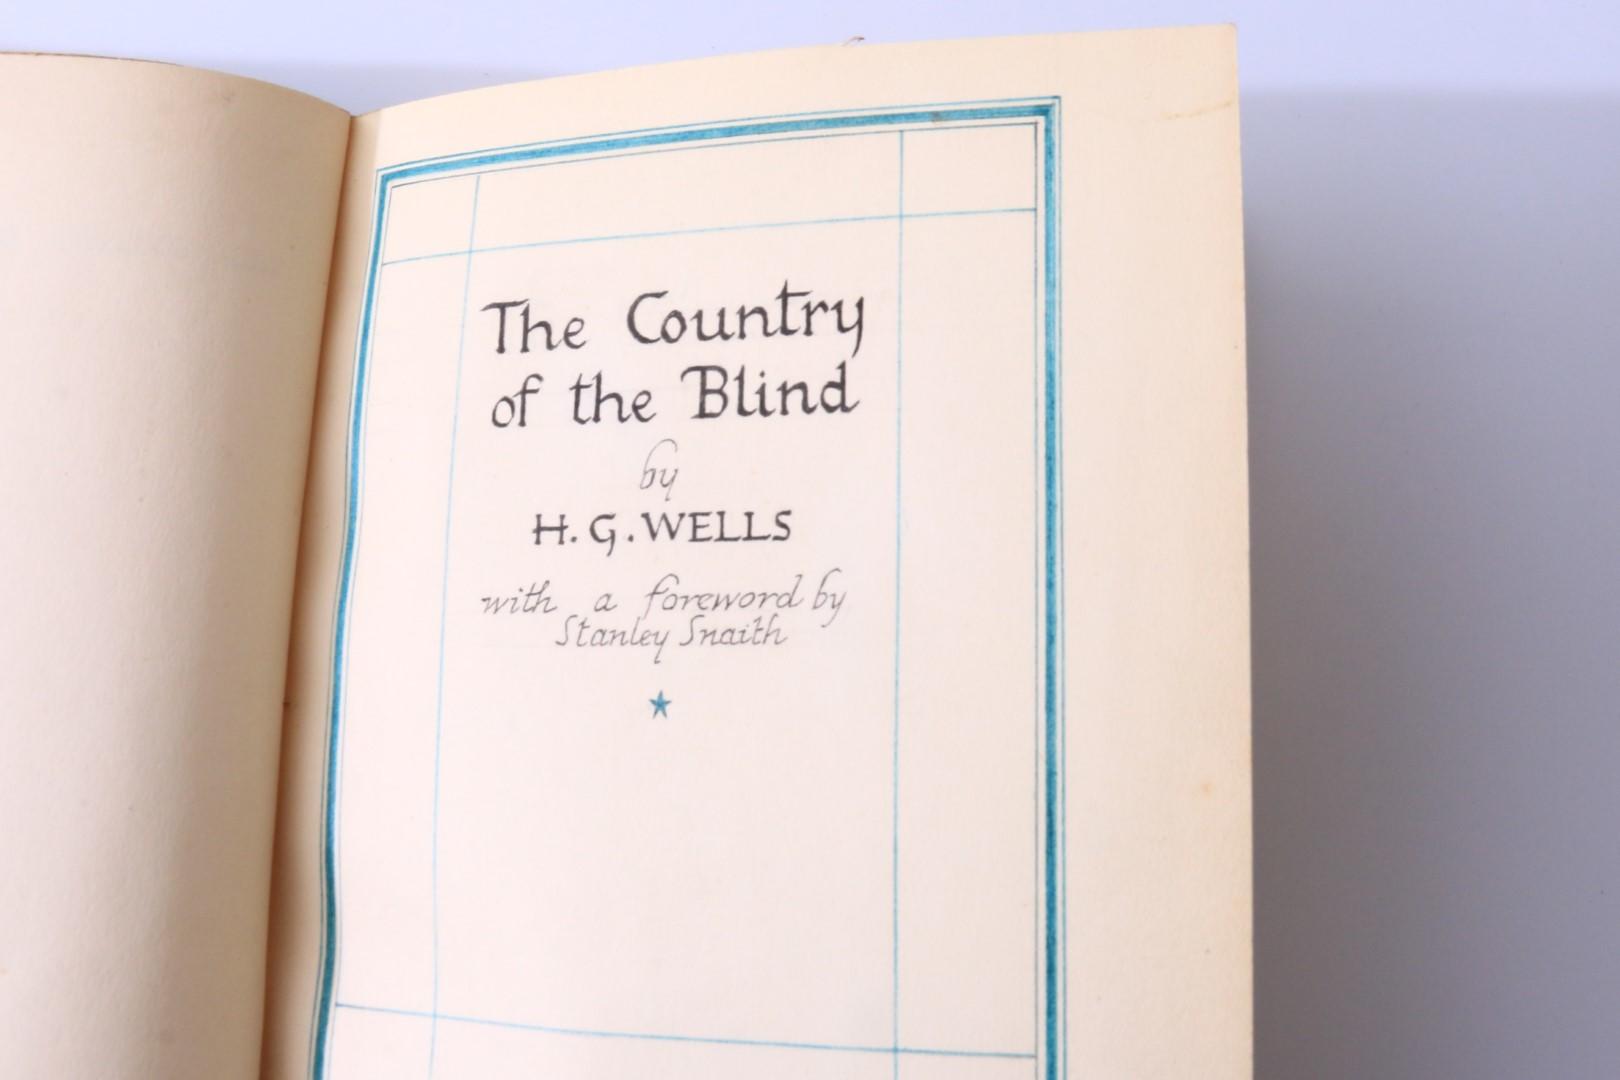 H.G. Wells - The Country of the Blind - A Typed Copy - None, 1925, Manuscript.